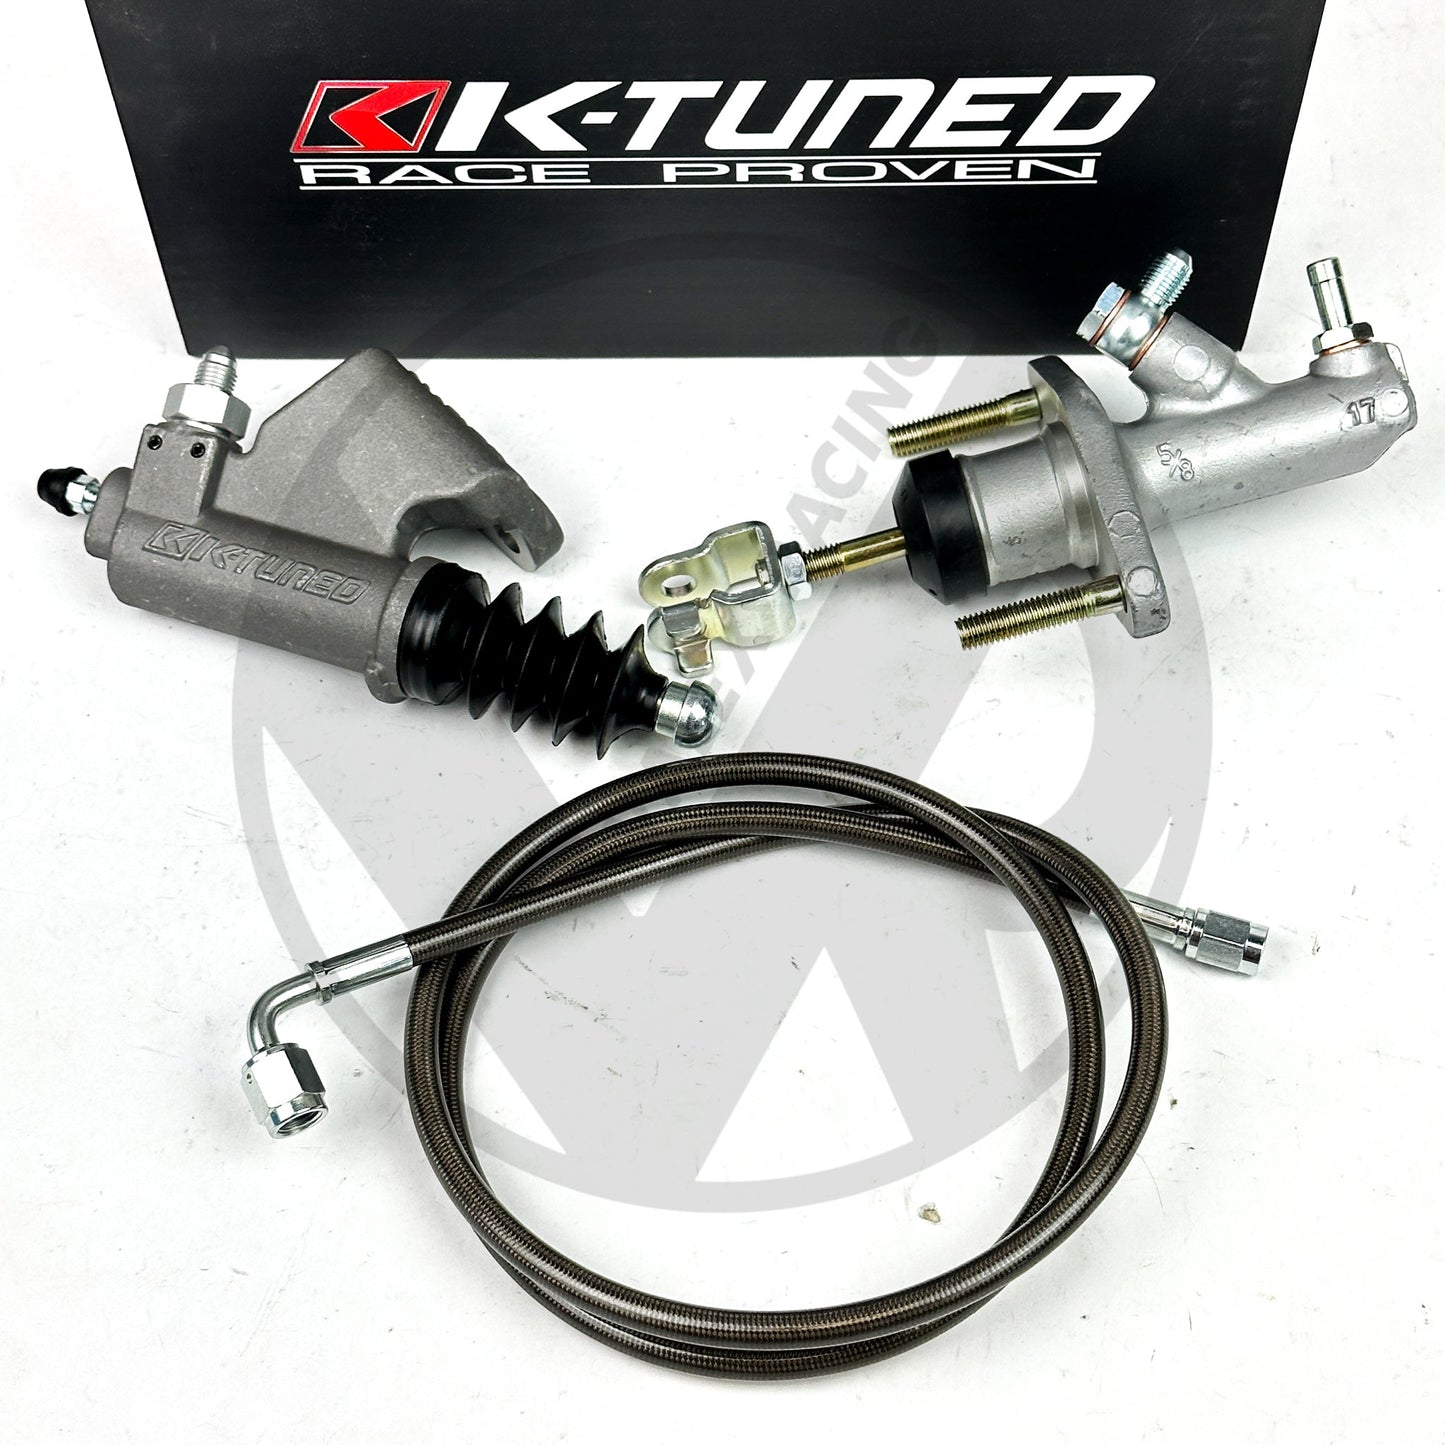 Bolt In EM1 CMC & K-Tuned Slave Kit for 9th Gen Honda Civic 12-15 Si with Stainless Steel Clutch Line